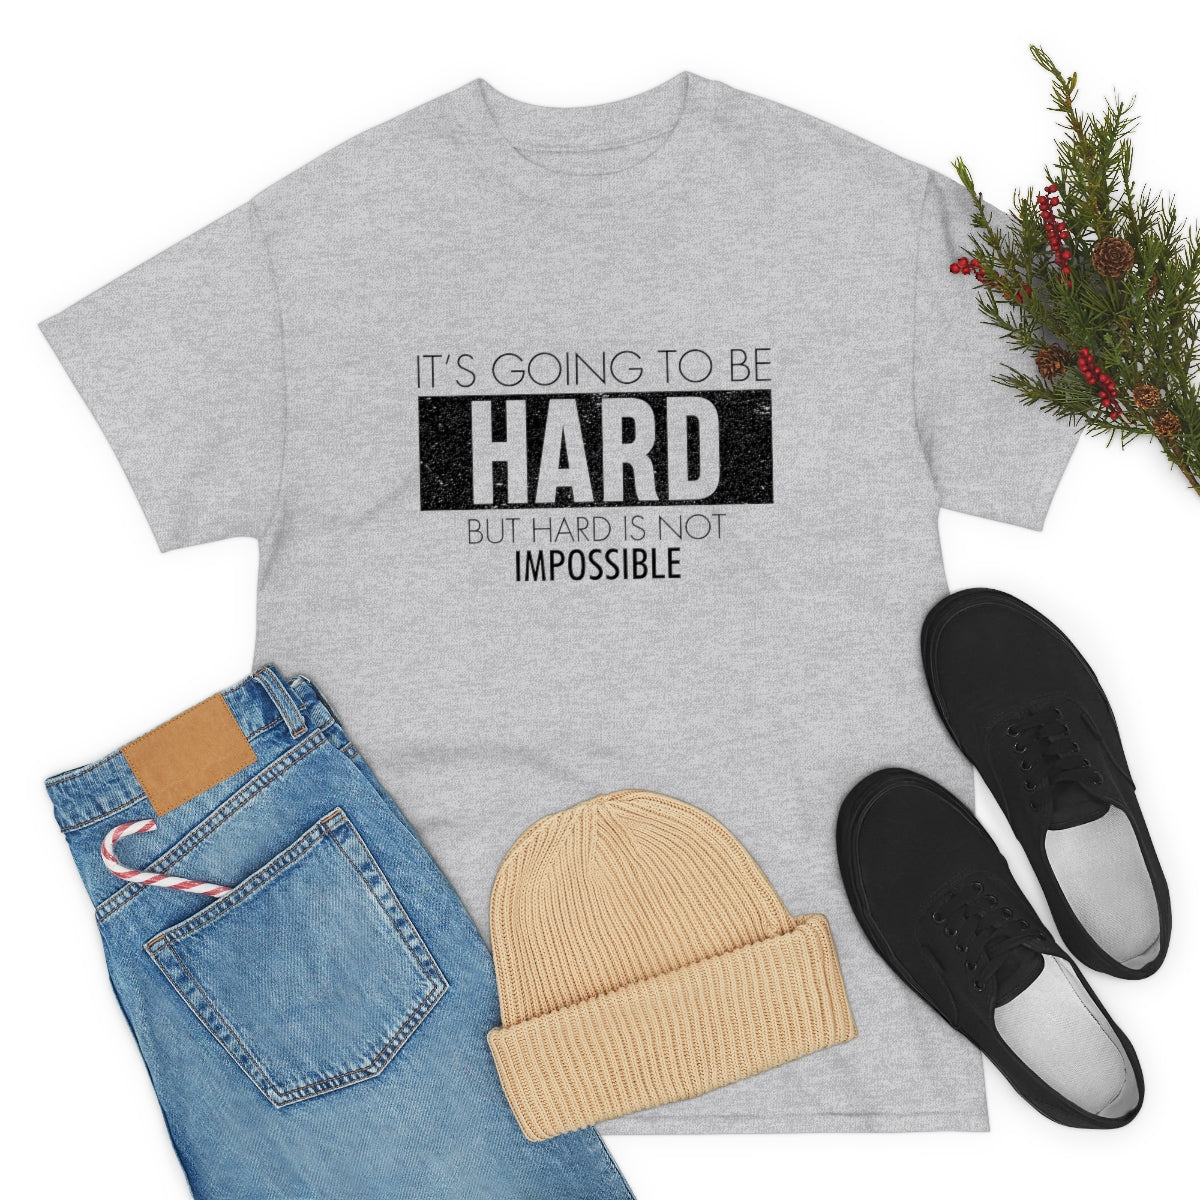 It's going to be hard but no impossible Unisex Heavy Cotton Tee